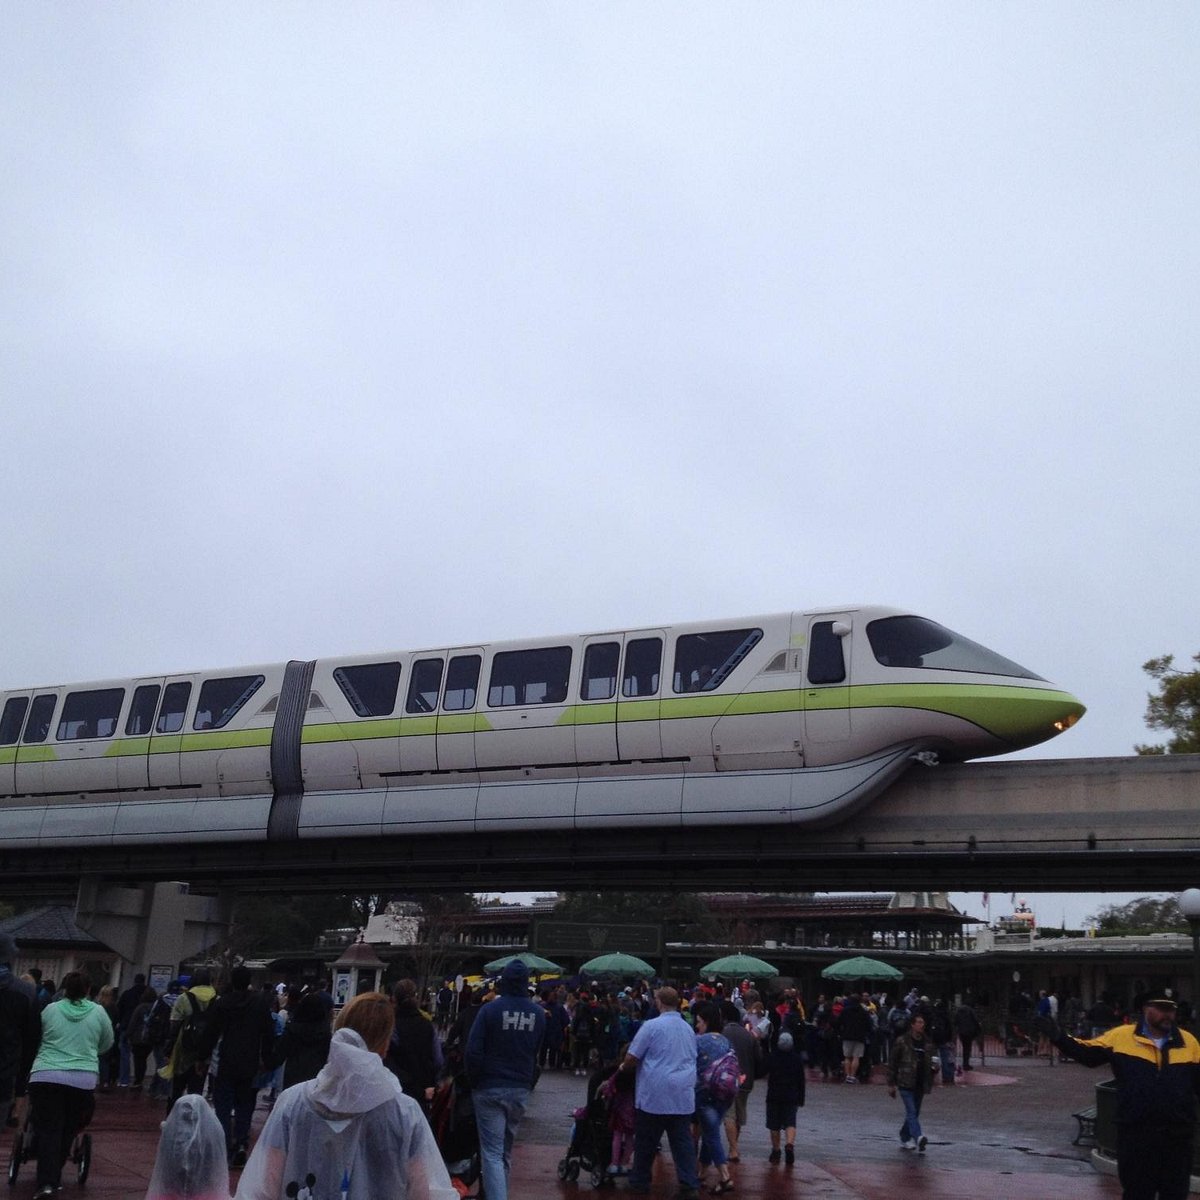 Disney's Parking Trams, Buses, and Monorails Get Updated - Orlando